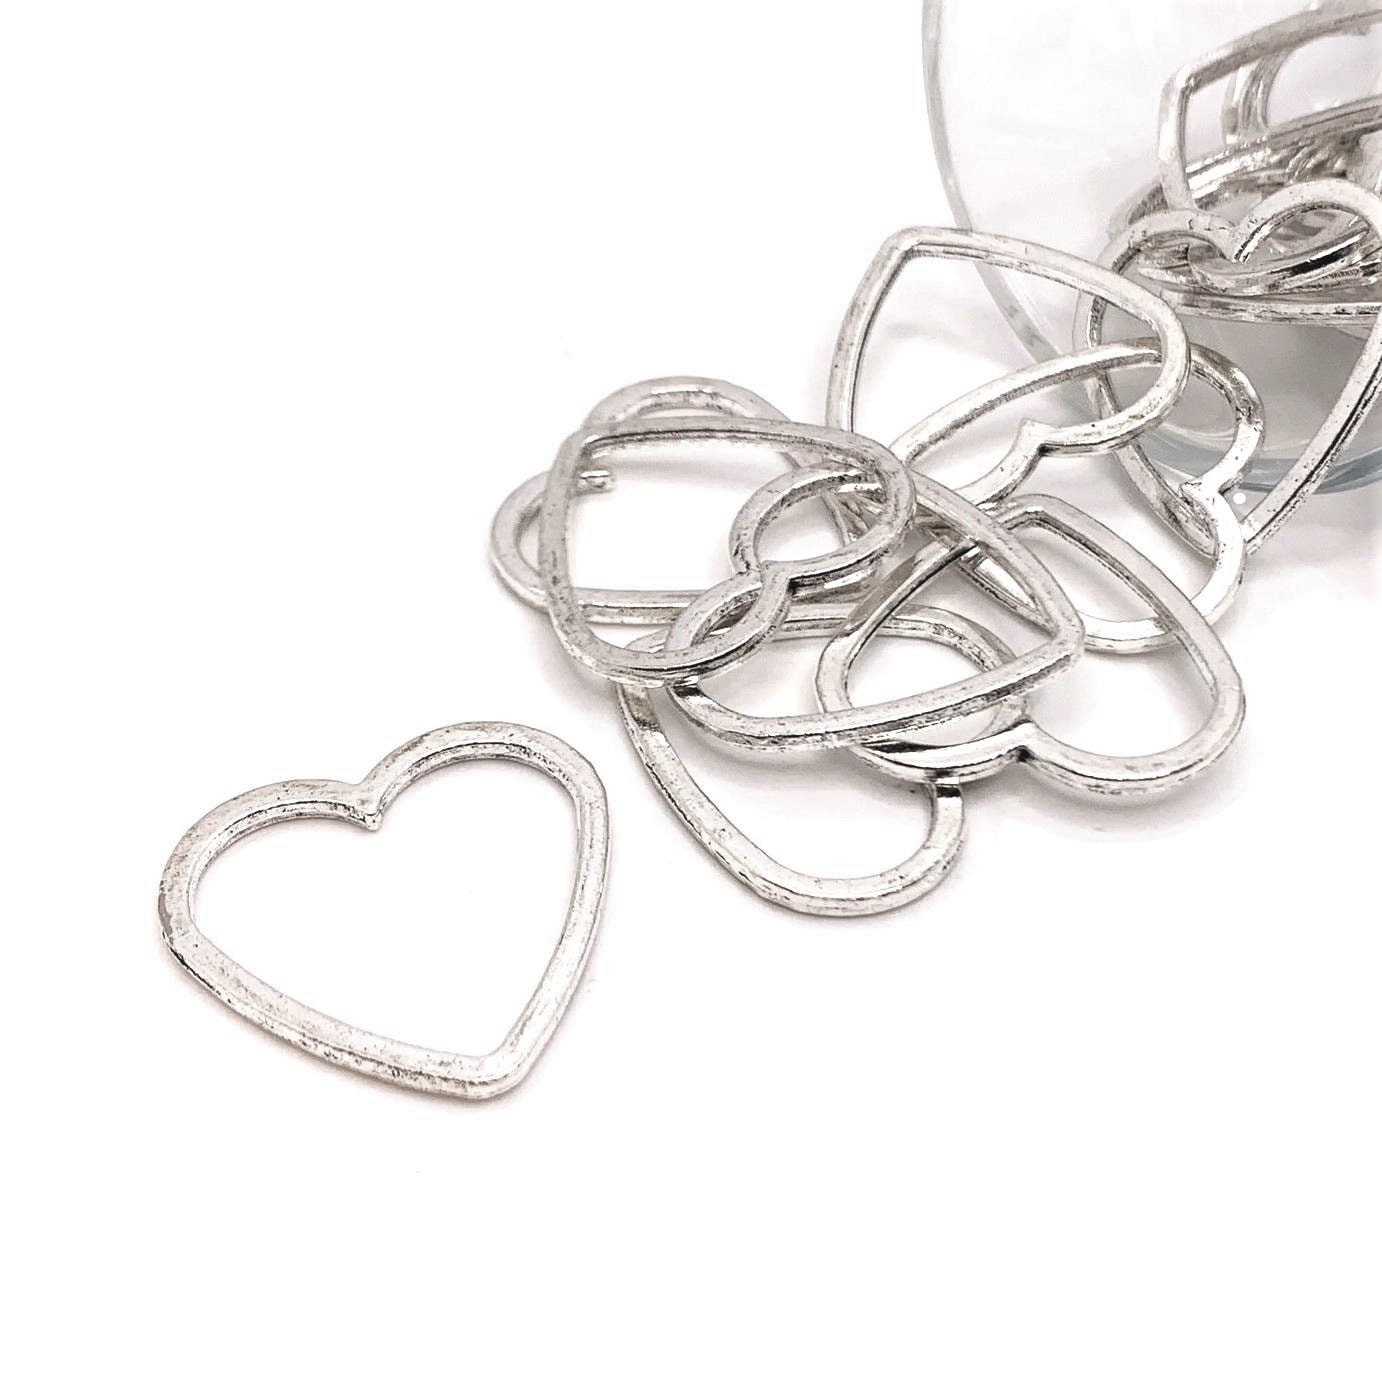 3mm Silver Plated Open Jump Rings, 1/8 Steel Jump Ring Clasp Connector,  Earring Connectors B324 